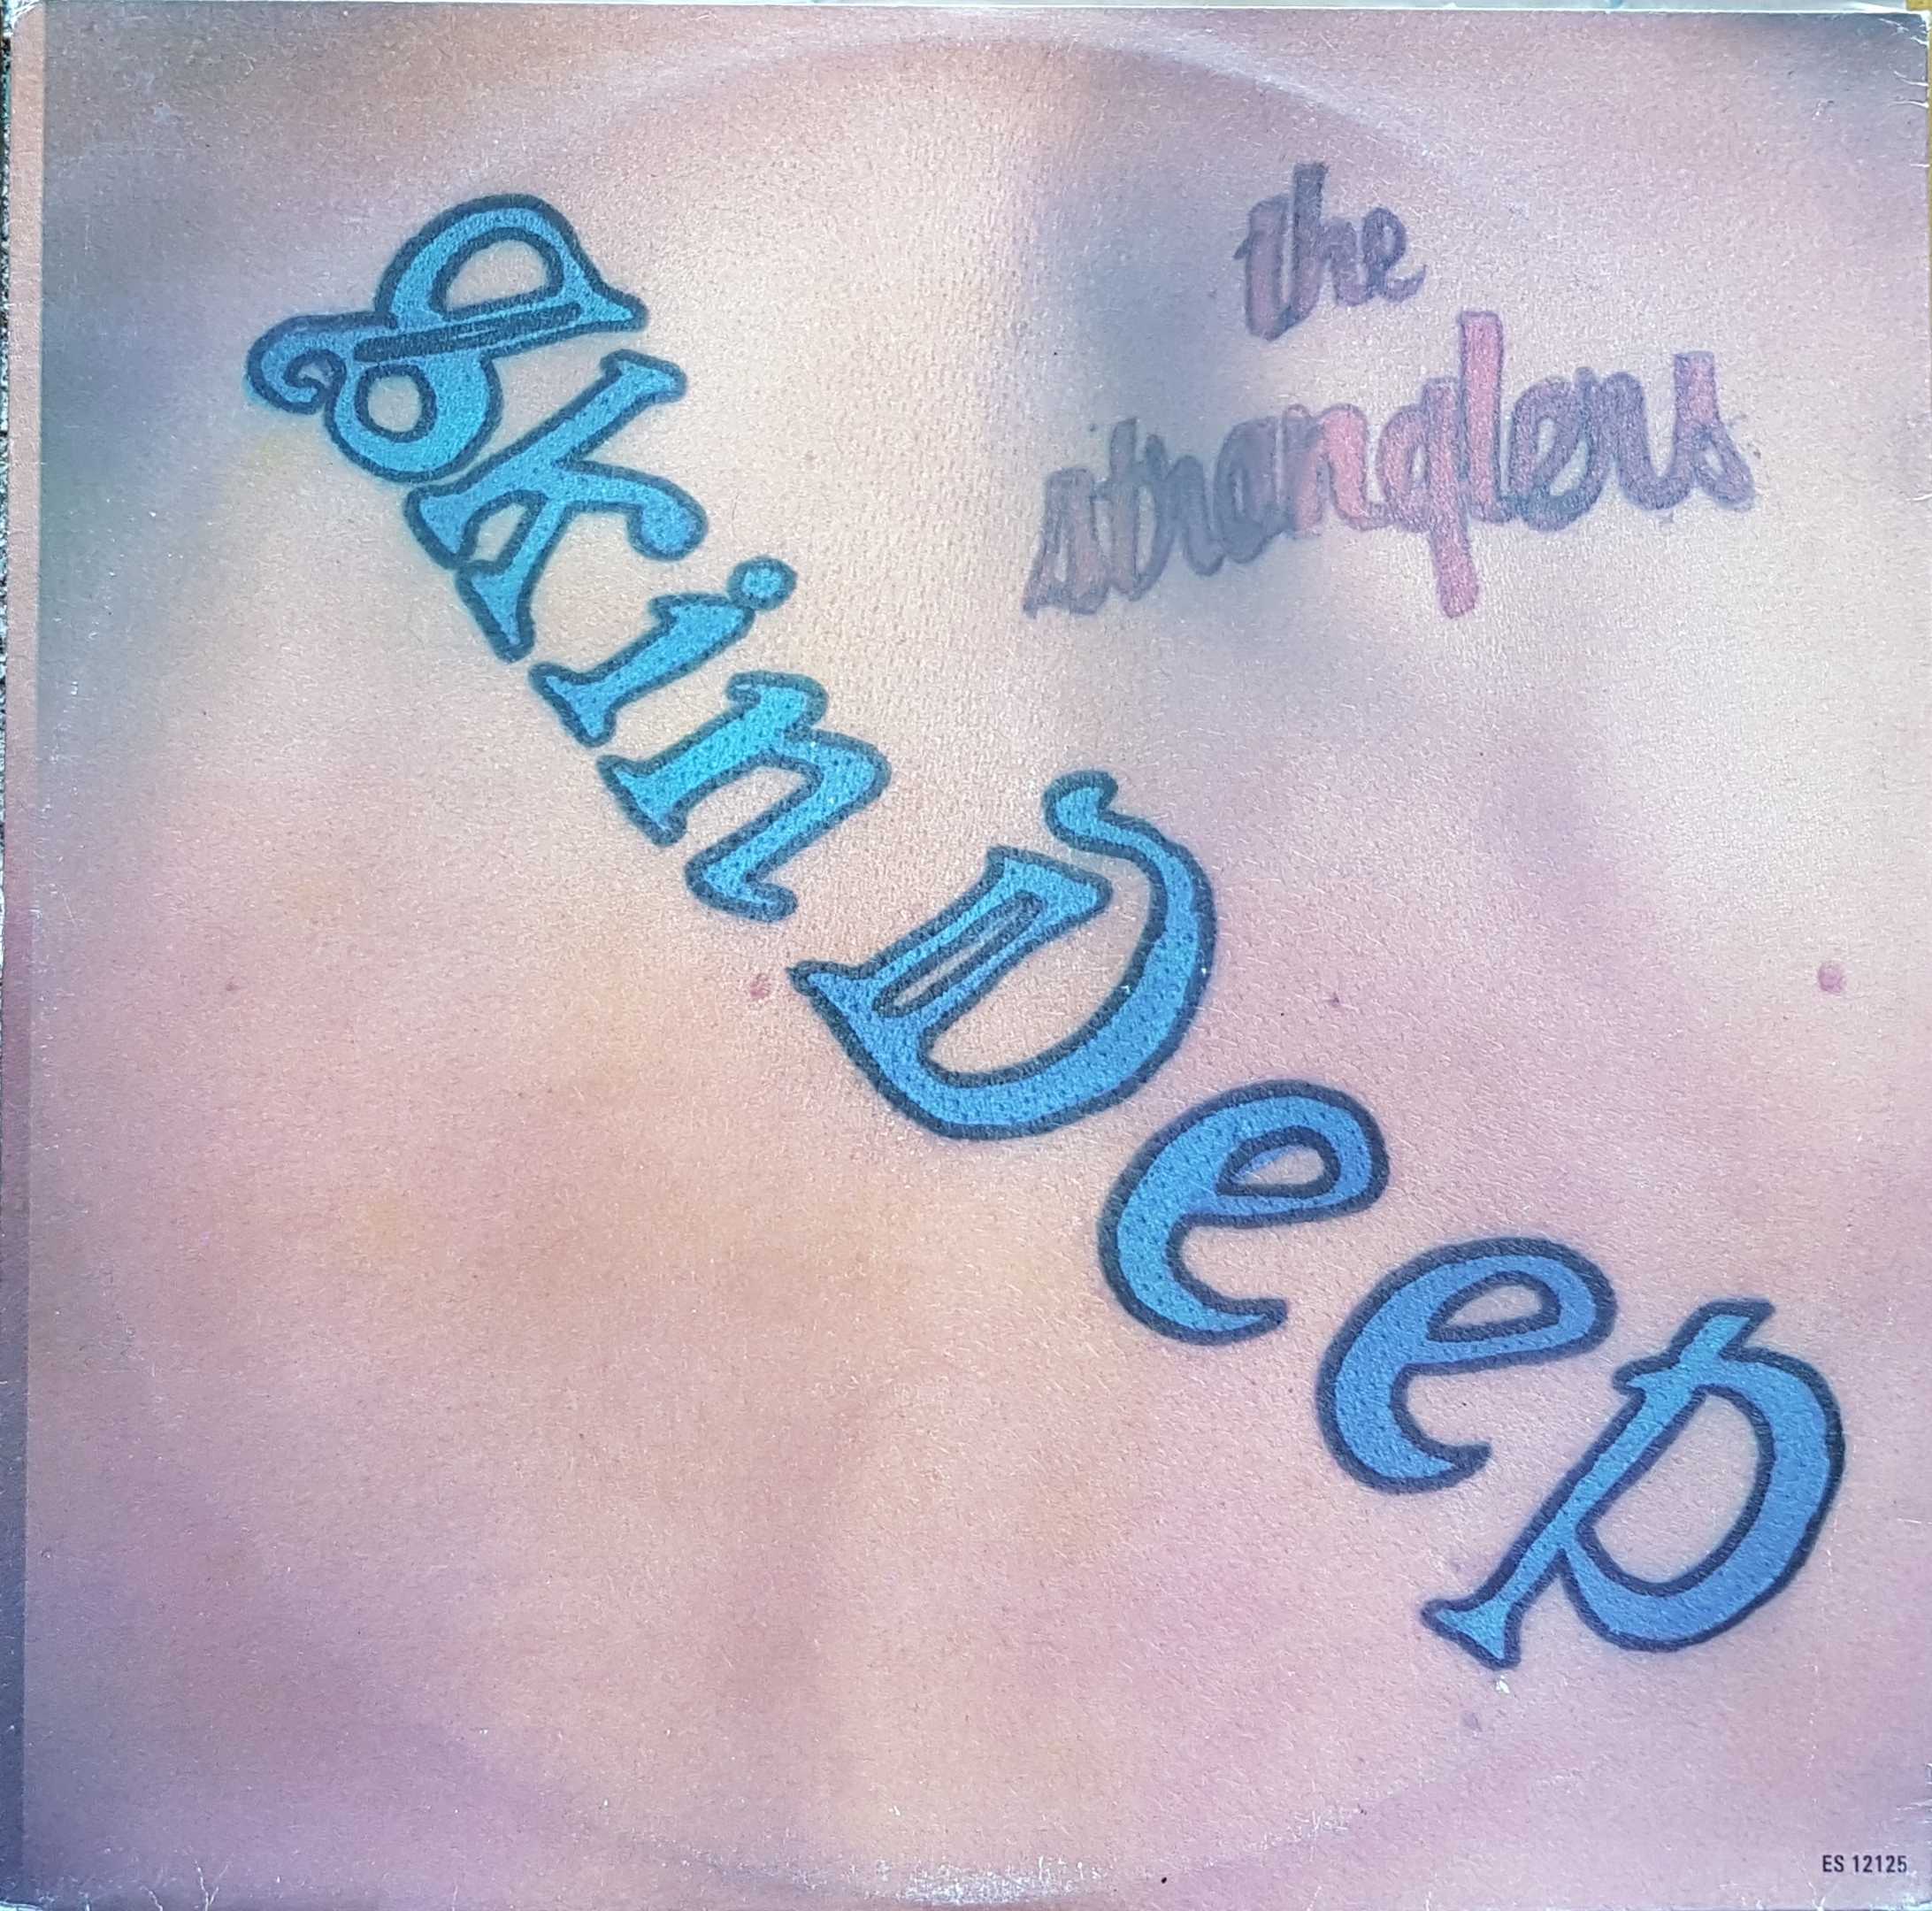 Picture of ES 12125 Skin deep by artist The Stranglers from The Stranglers